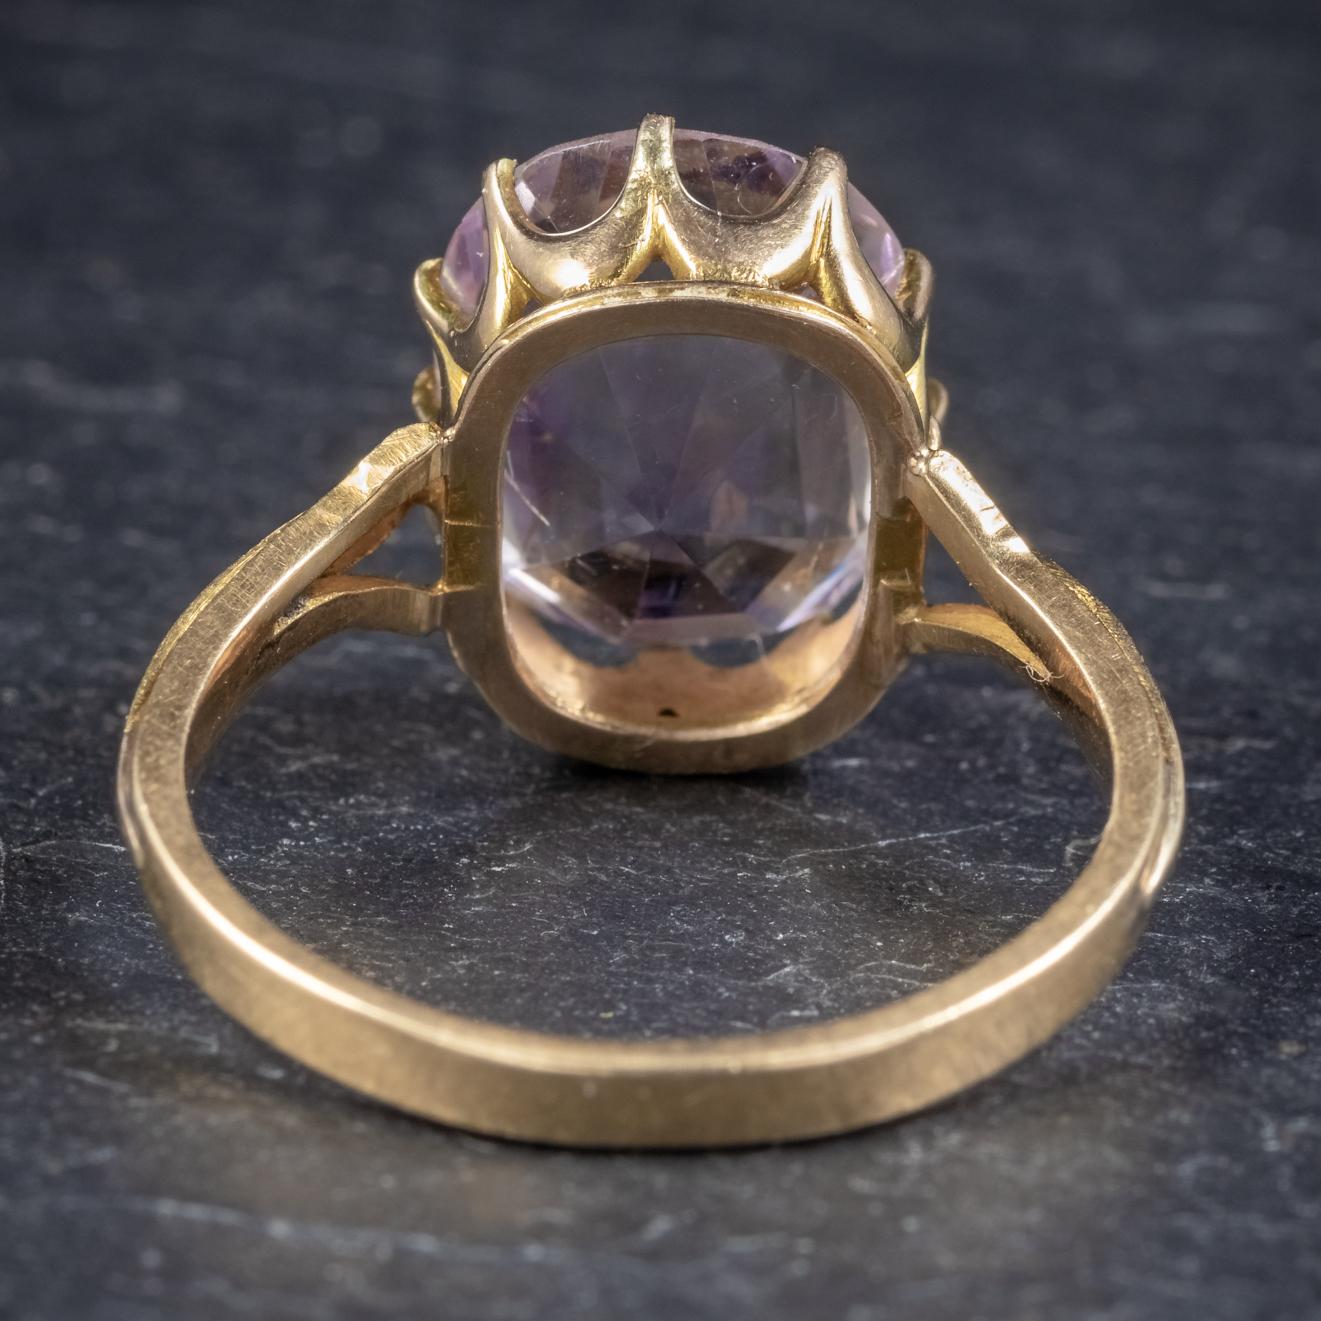 Women's Antique Victorian Purple Spinel 18 Carat Gold 5 Carat Spinel, circa 1900 Ring For Sale